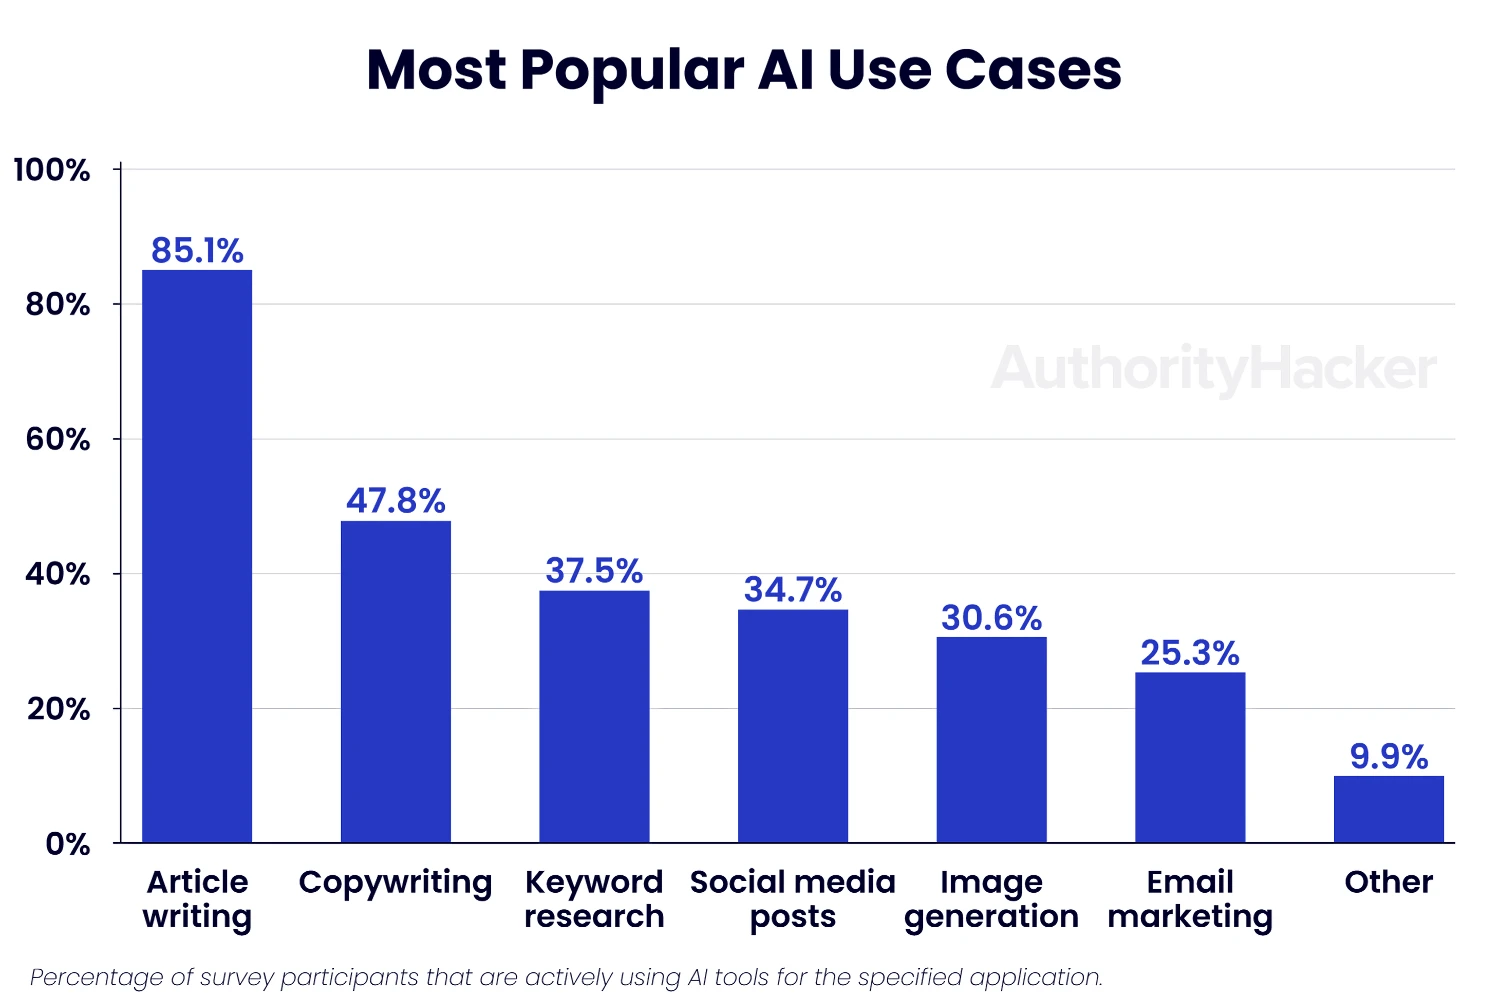 AI Content and Marketing Statistics on popular use cases